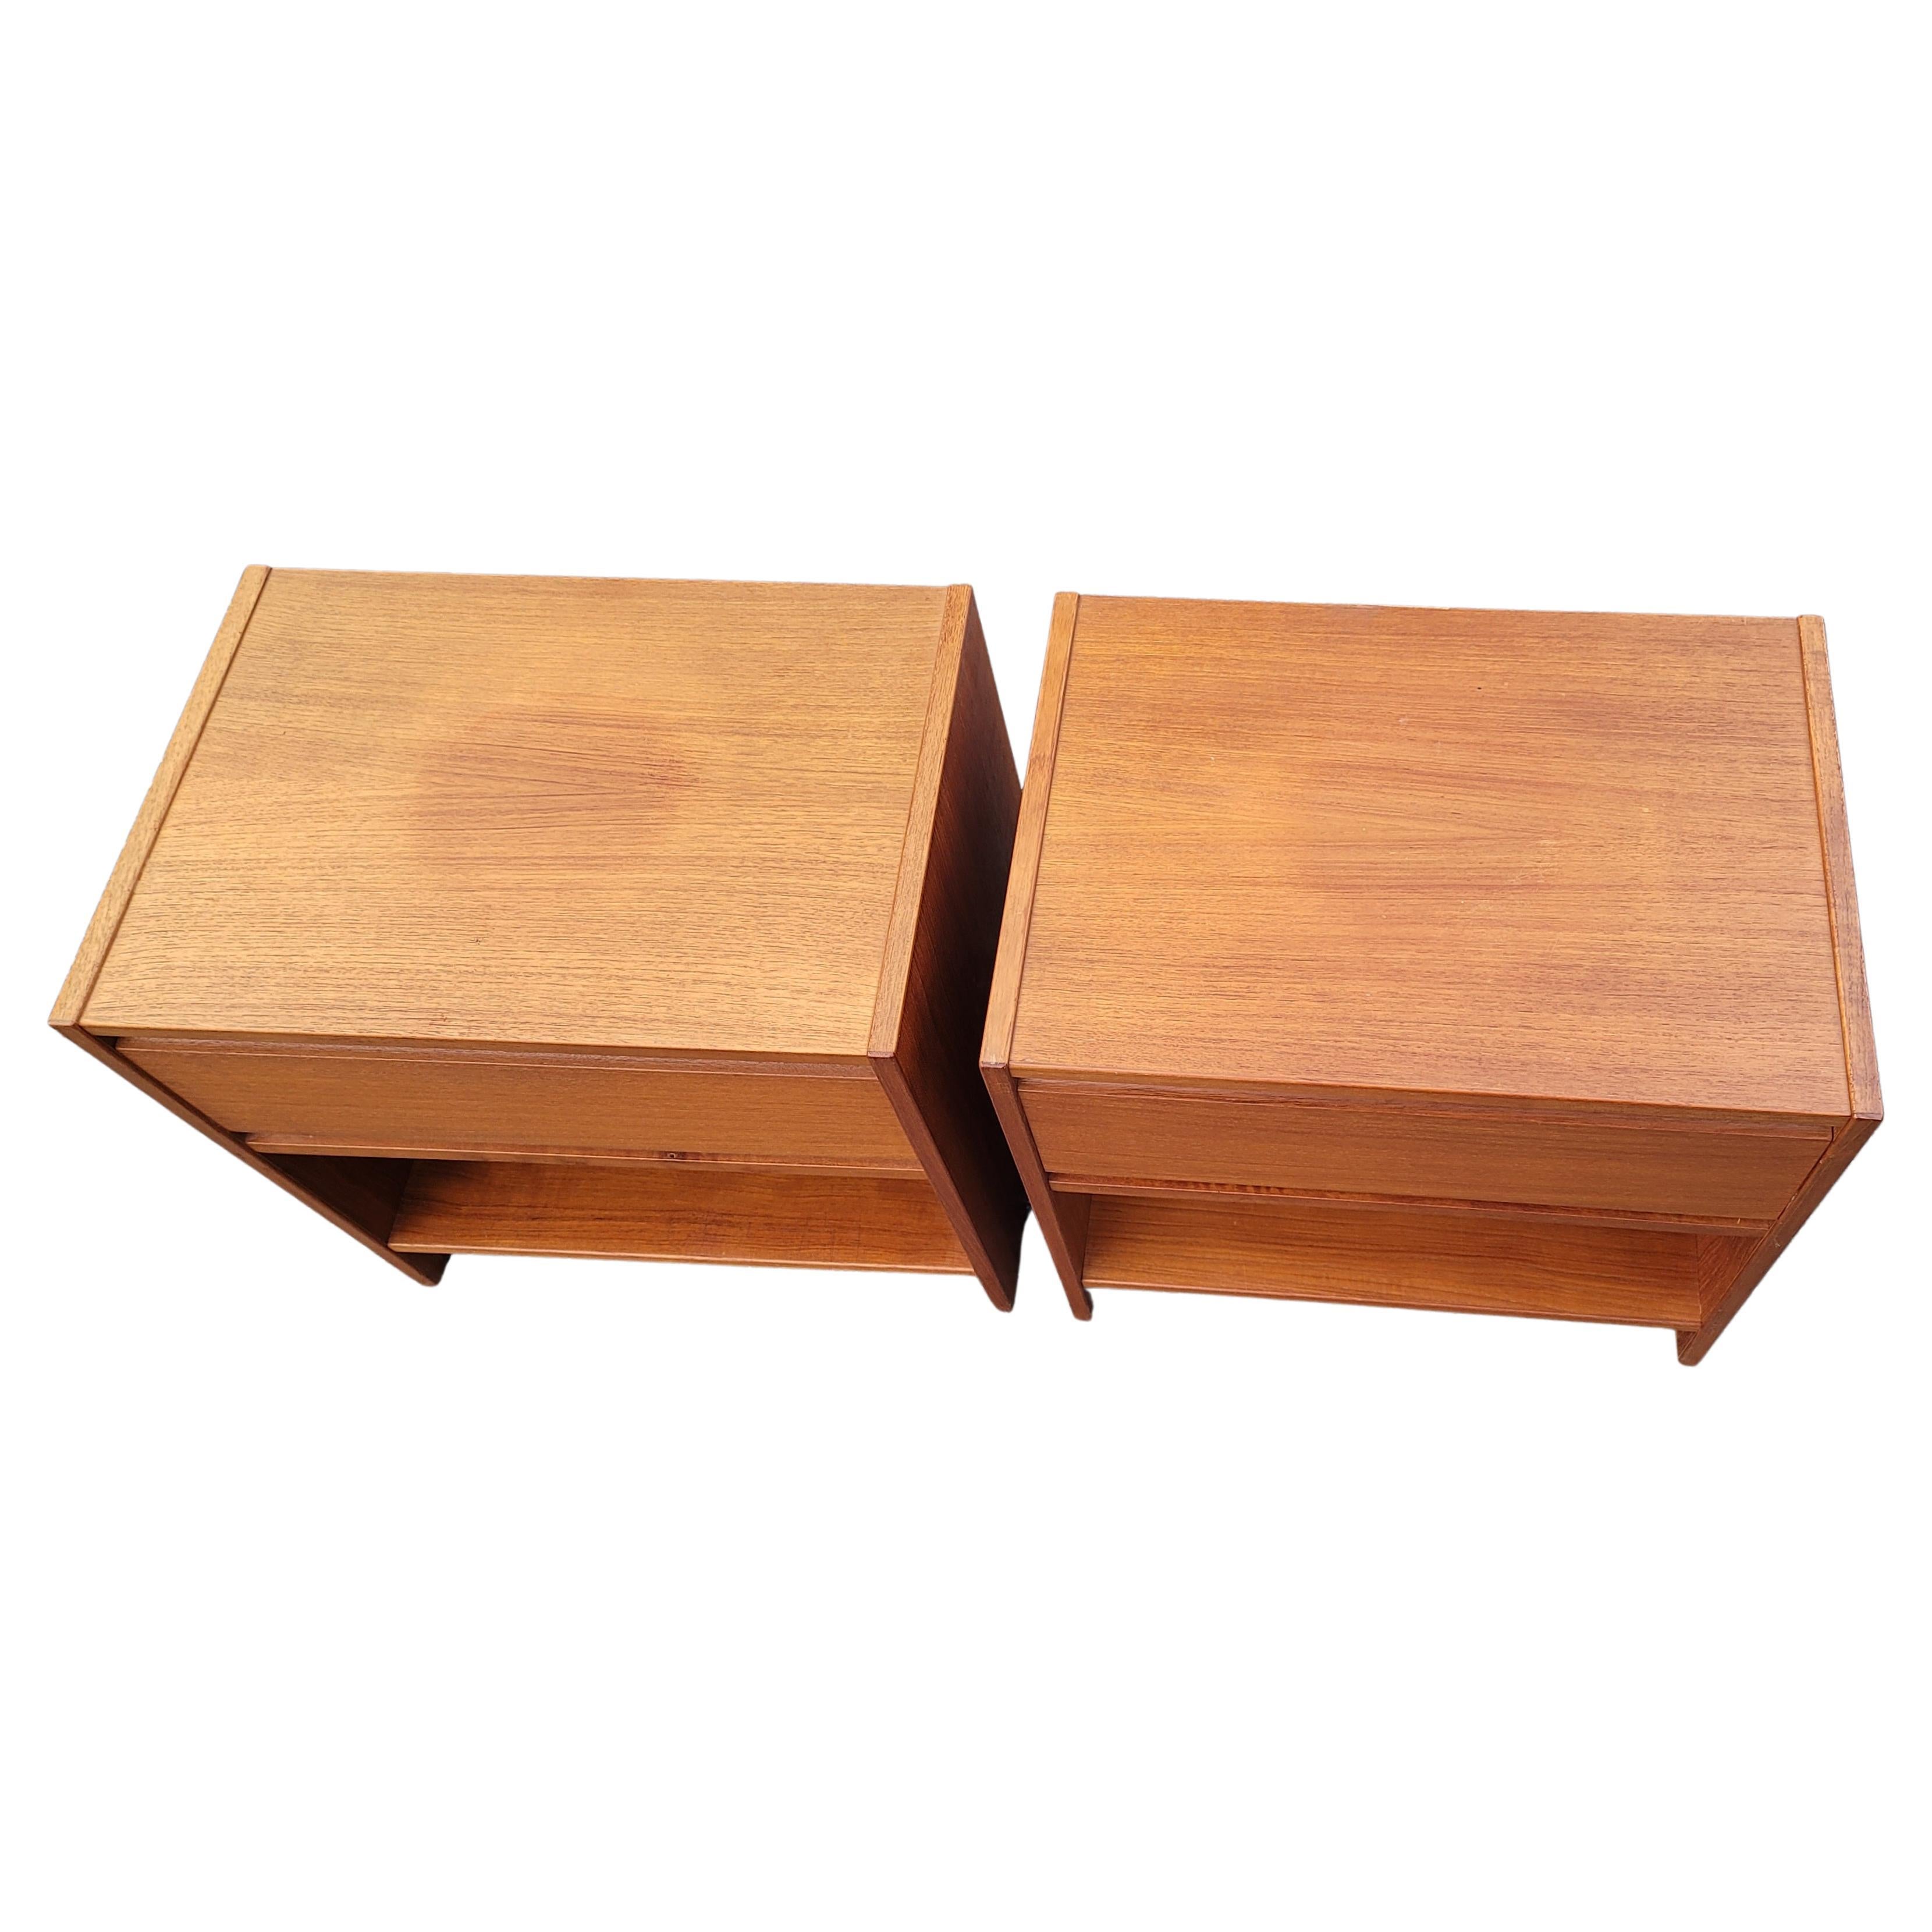 Vintage Danish Modern One Drawer Teak Nightstands, a Pair In Good Condition For Sale In Germantown, MD